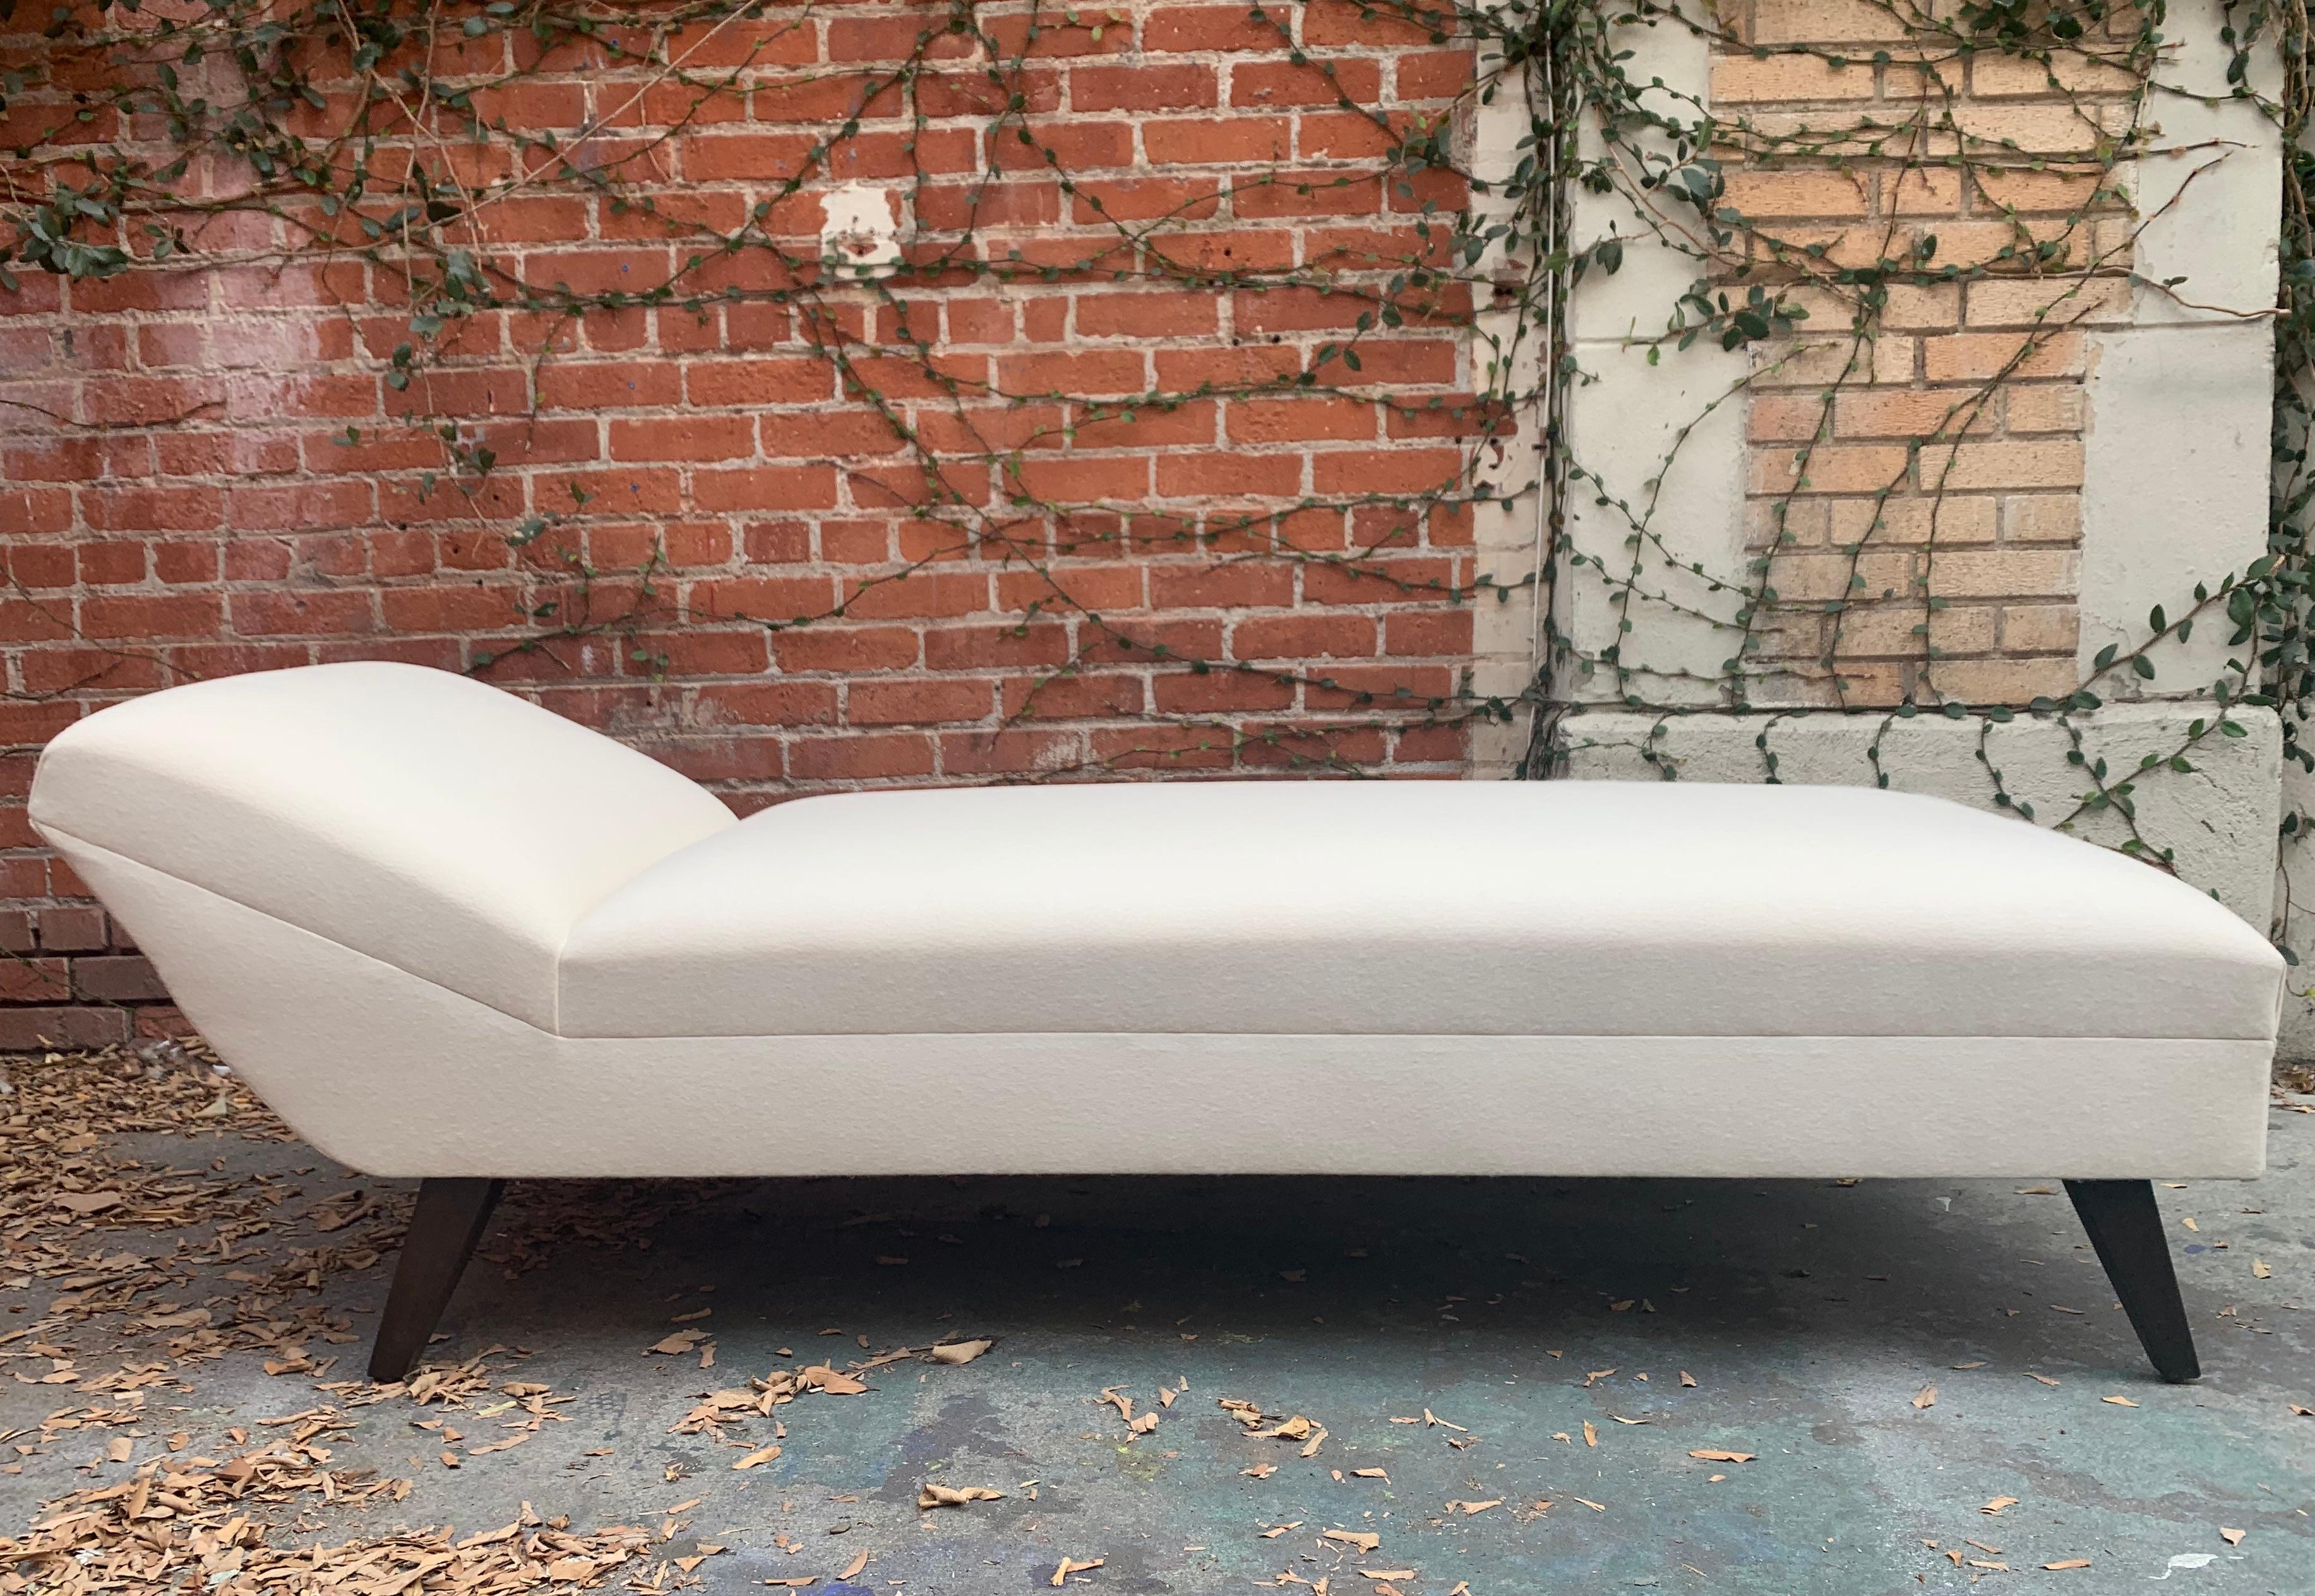 Elegant midcentury 1950s daybed upholstered in white wool with elegant single seam details and original legs.